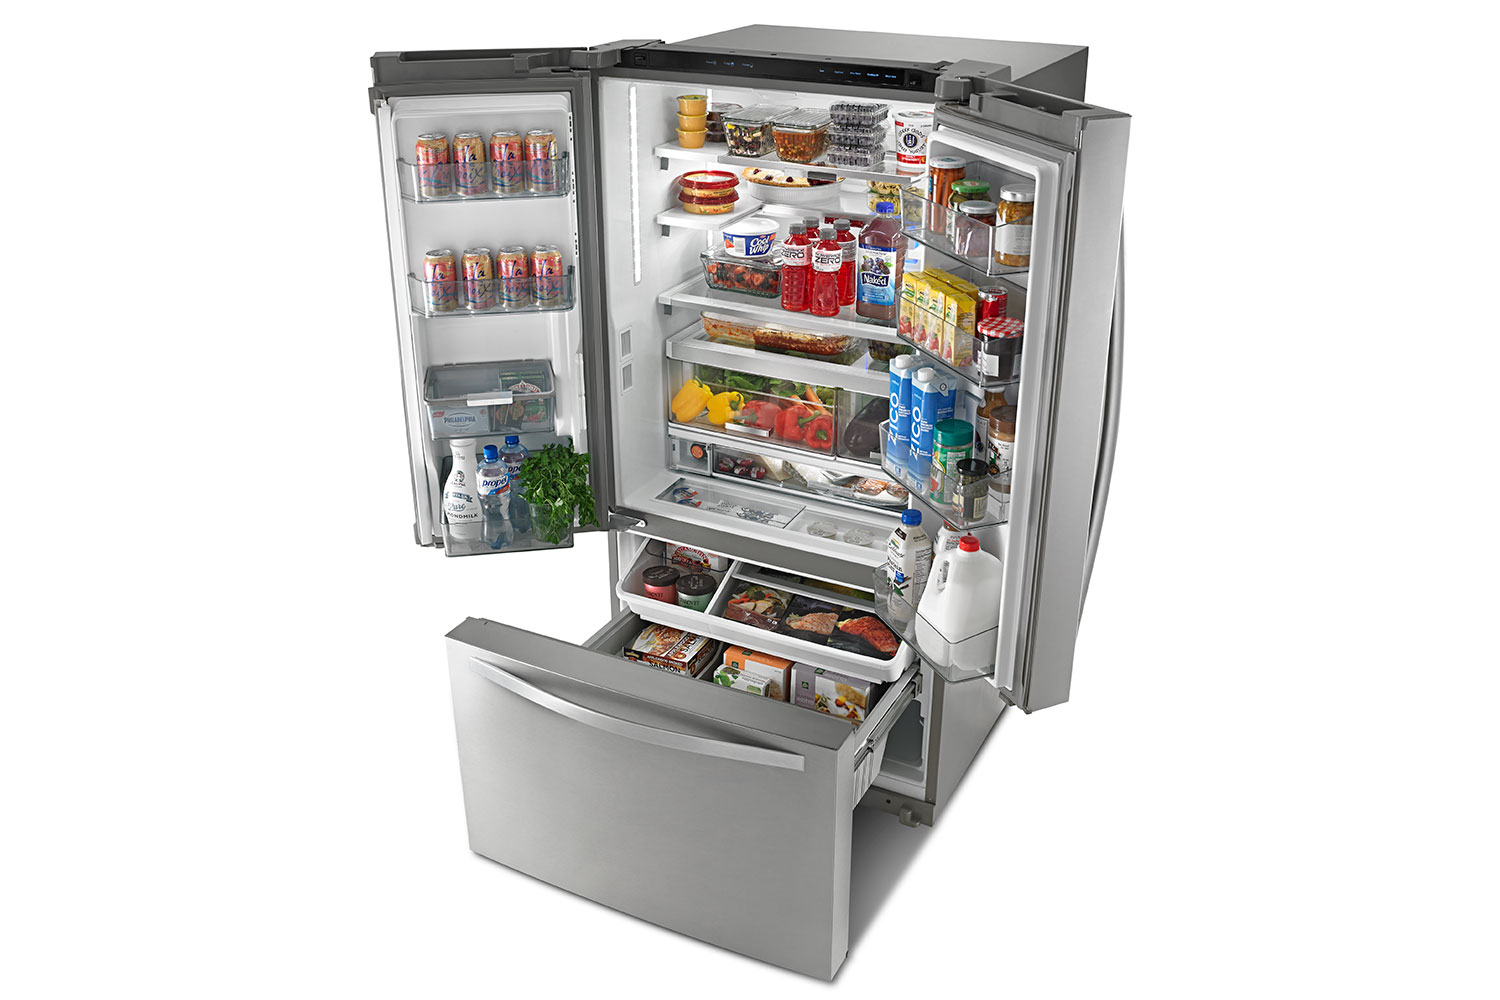 whirlpools smart appliances work with nest and amazon dash whirlpool pantry inspired french door refrigerator p150437 5z